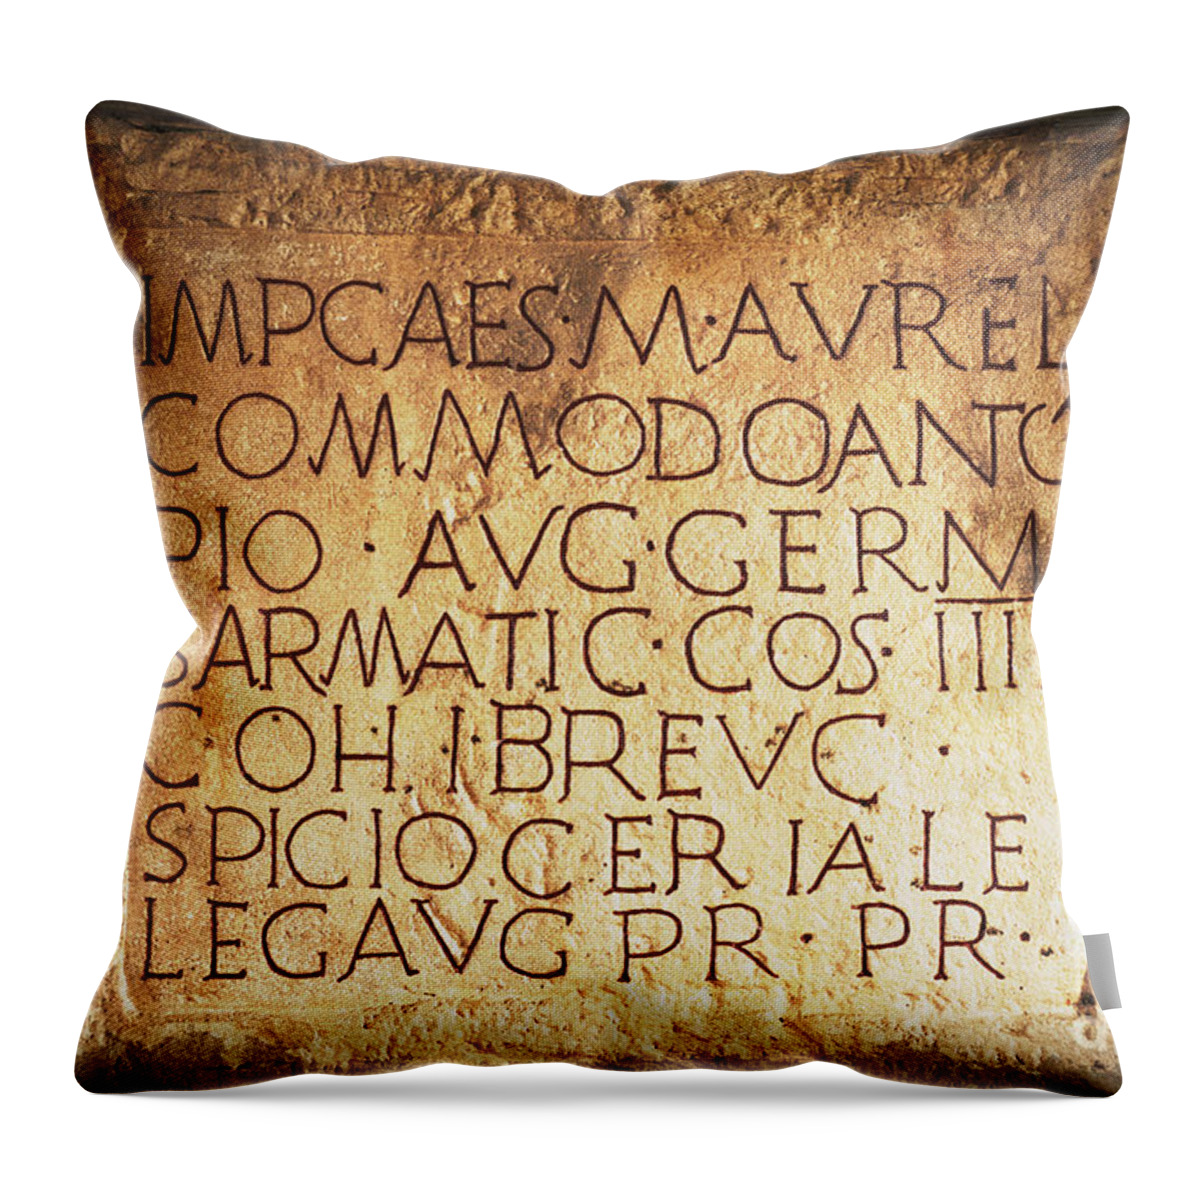 Stone Throw Pillow featuring the photograph Roman Inscription by Heiko Koehrer-Wagner